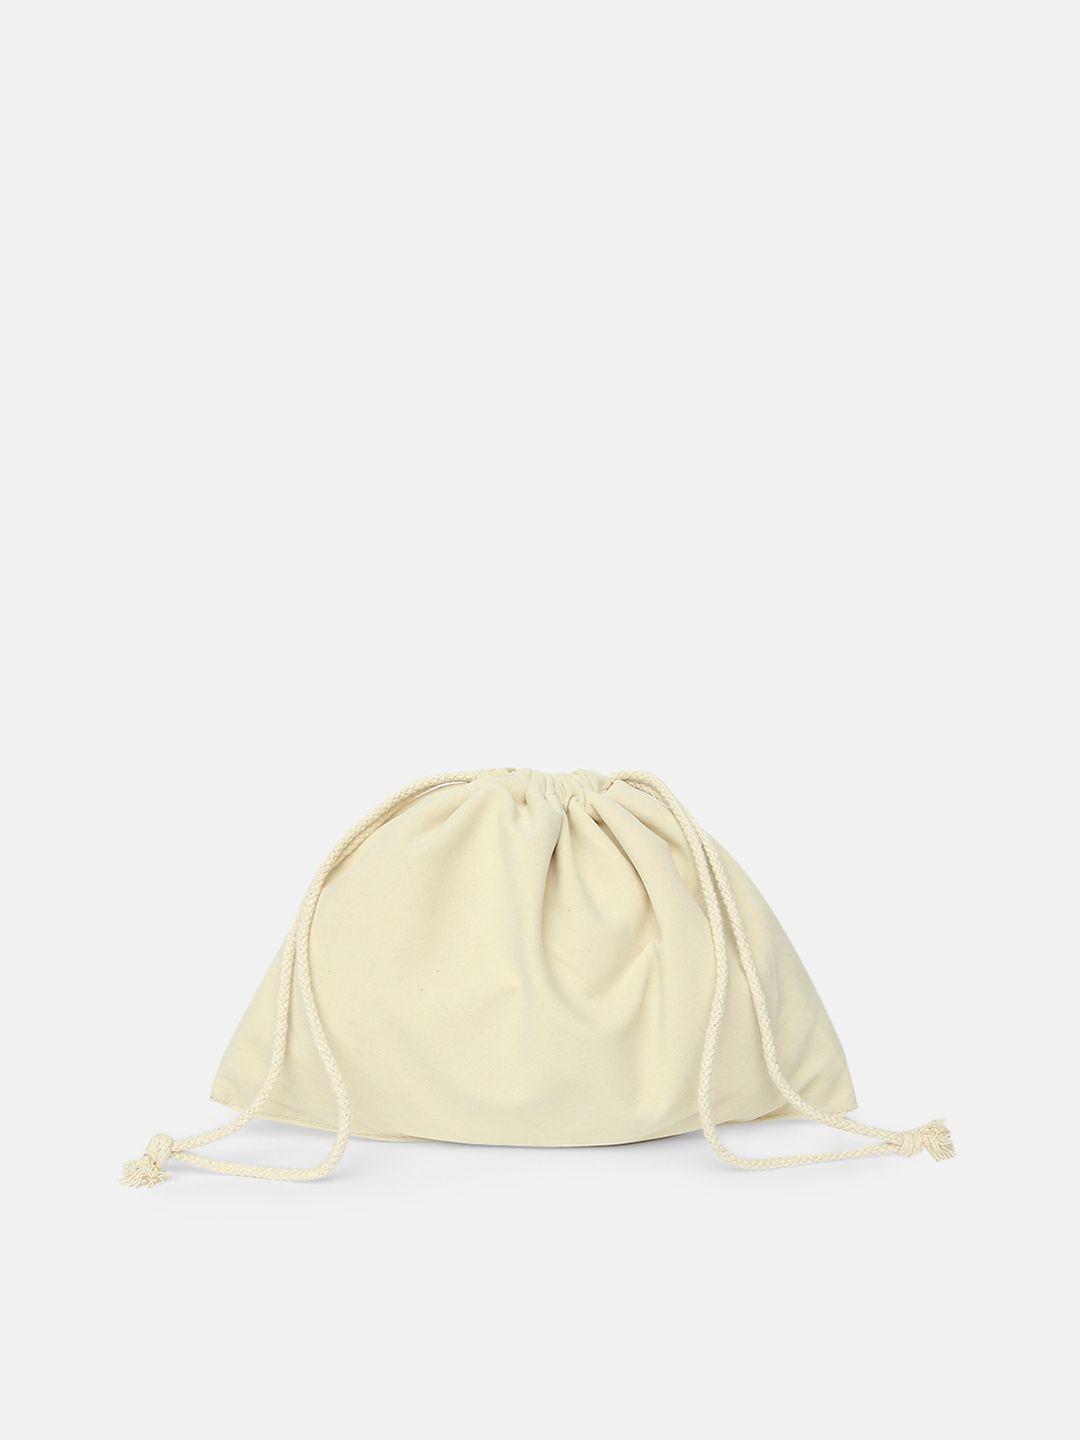 20dresses beige oversized bucket handheld bag with bow detail